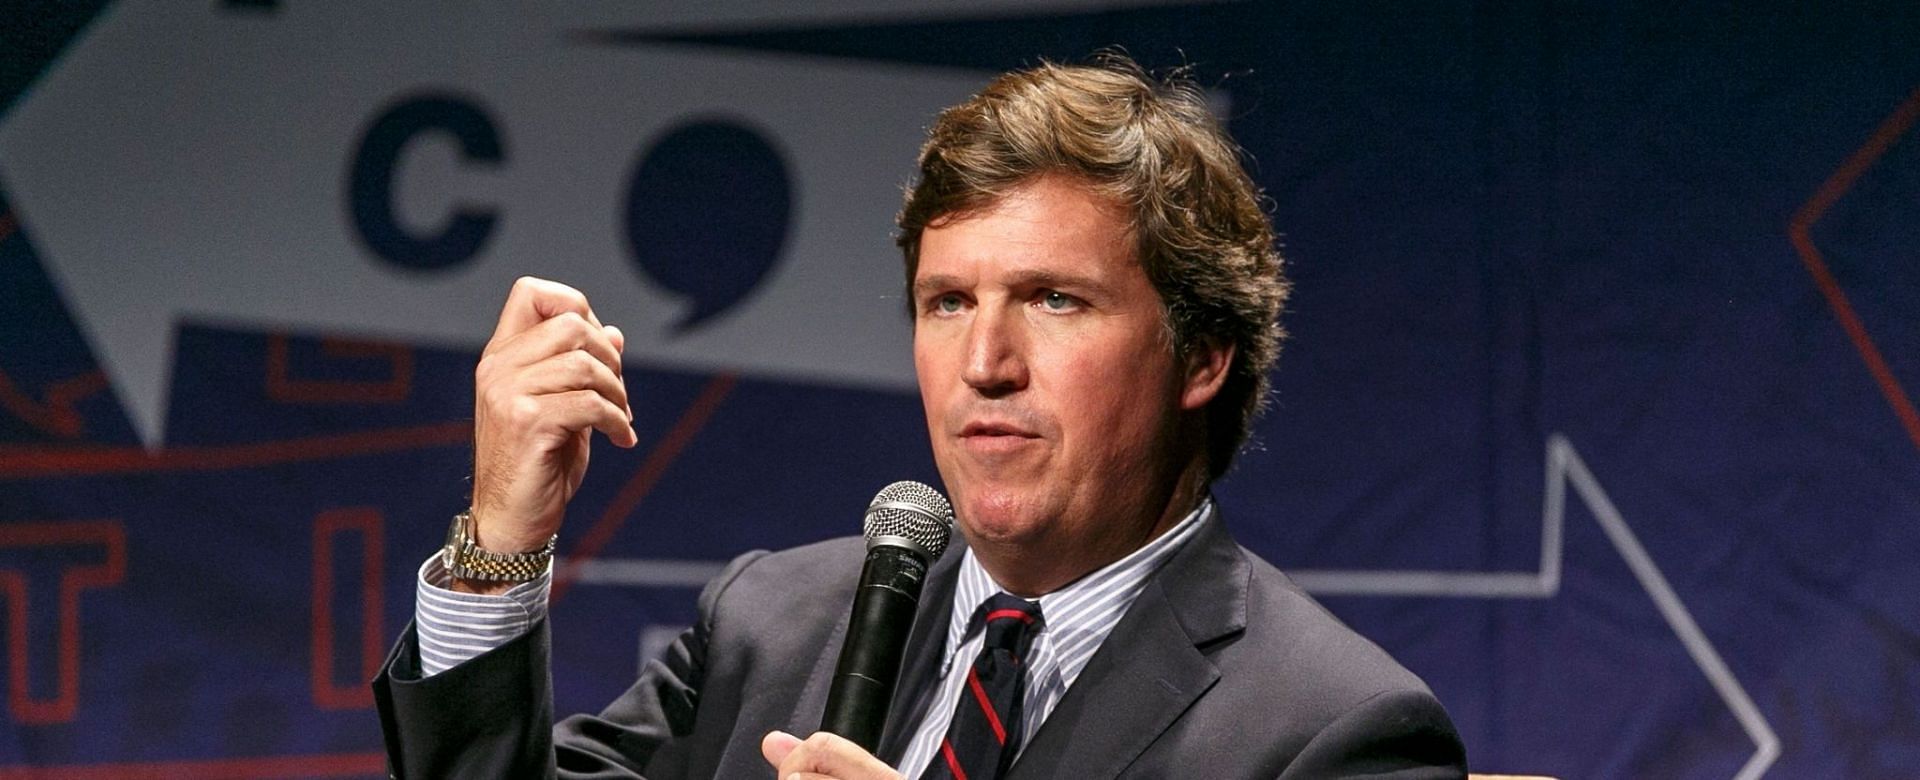 Social media users called out Carlson for Nancy Pelosi and Michael Jackson comparison (Image via Rich Polk/Getty Images)